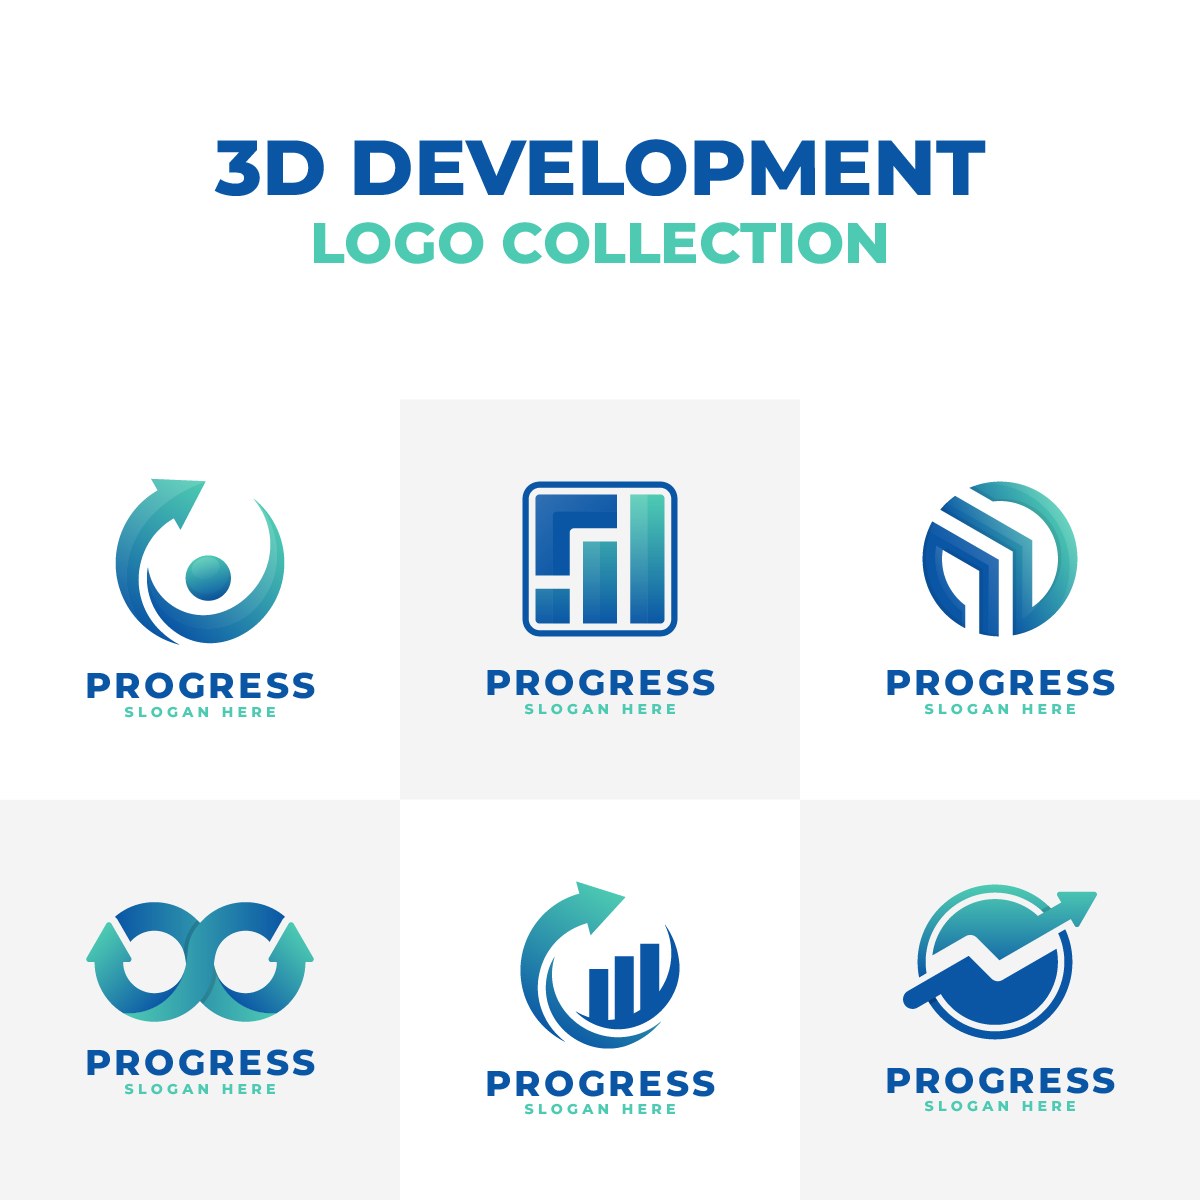 3D Modern Development Logo Collection cover image.